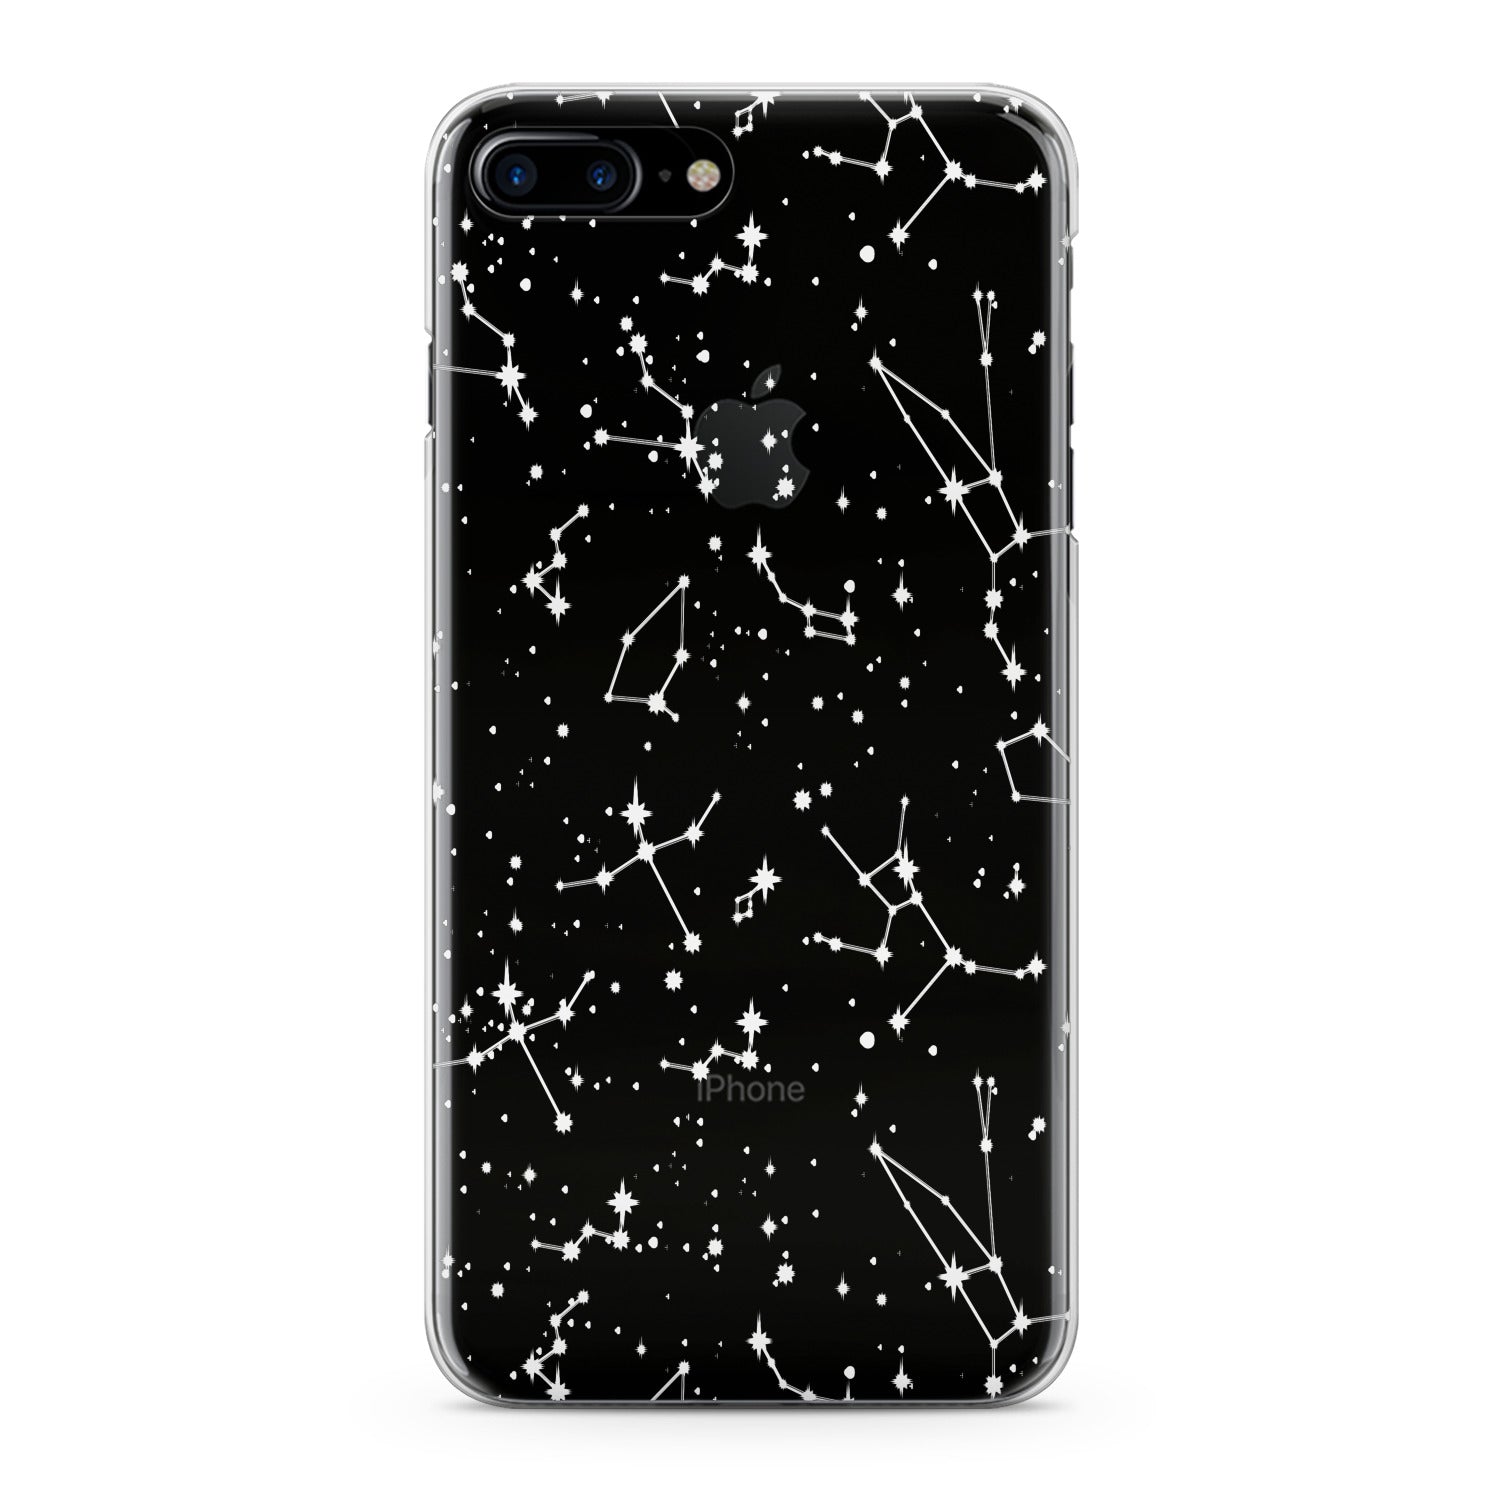 Lex Altern Zodiacal Constellation Phone Case for your iPhone & Android phone.